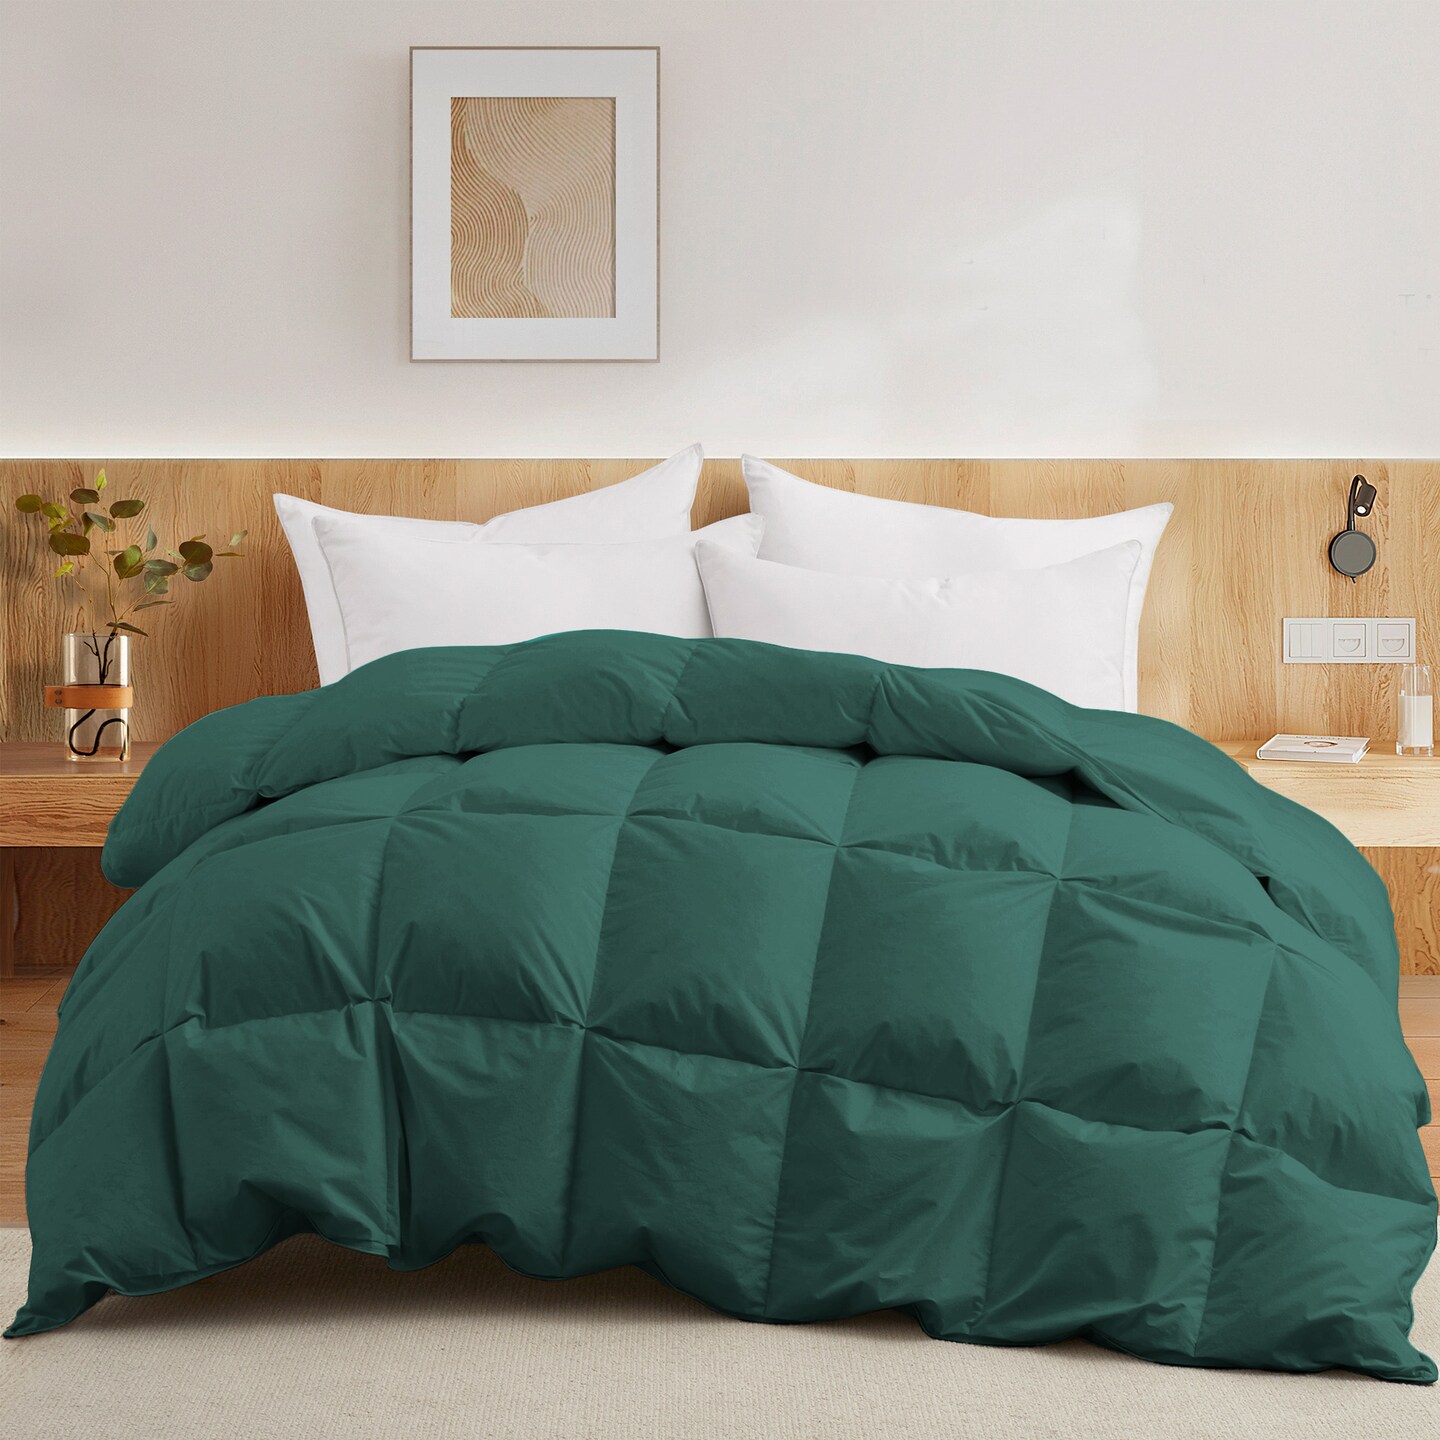 Puredown Premium Goose Feather and Down Duvet Insert -All Season Comforter with Breathable Cotton Cover